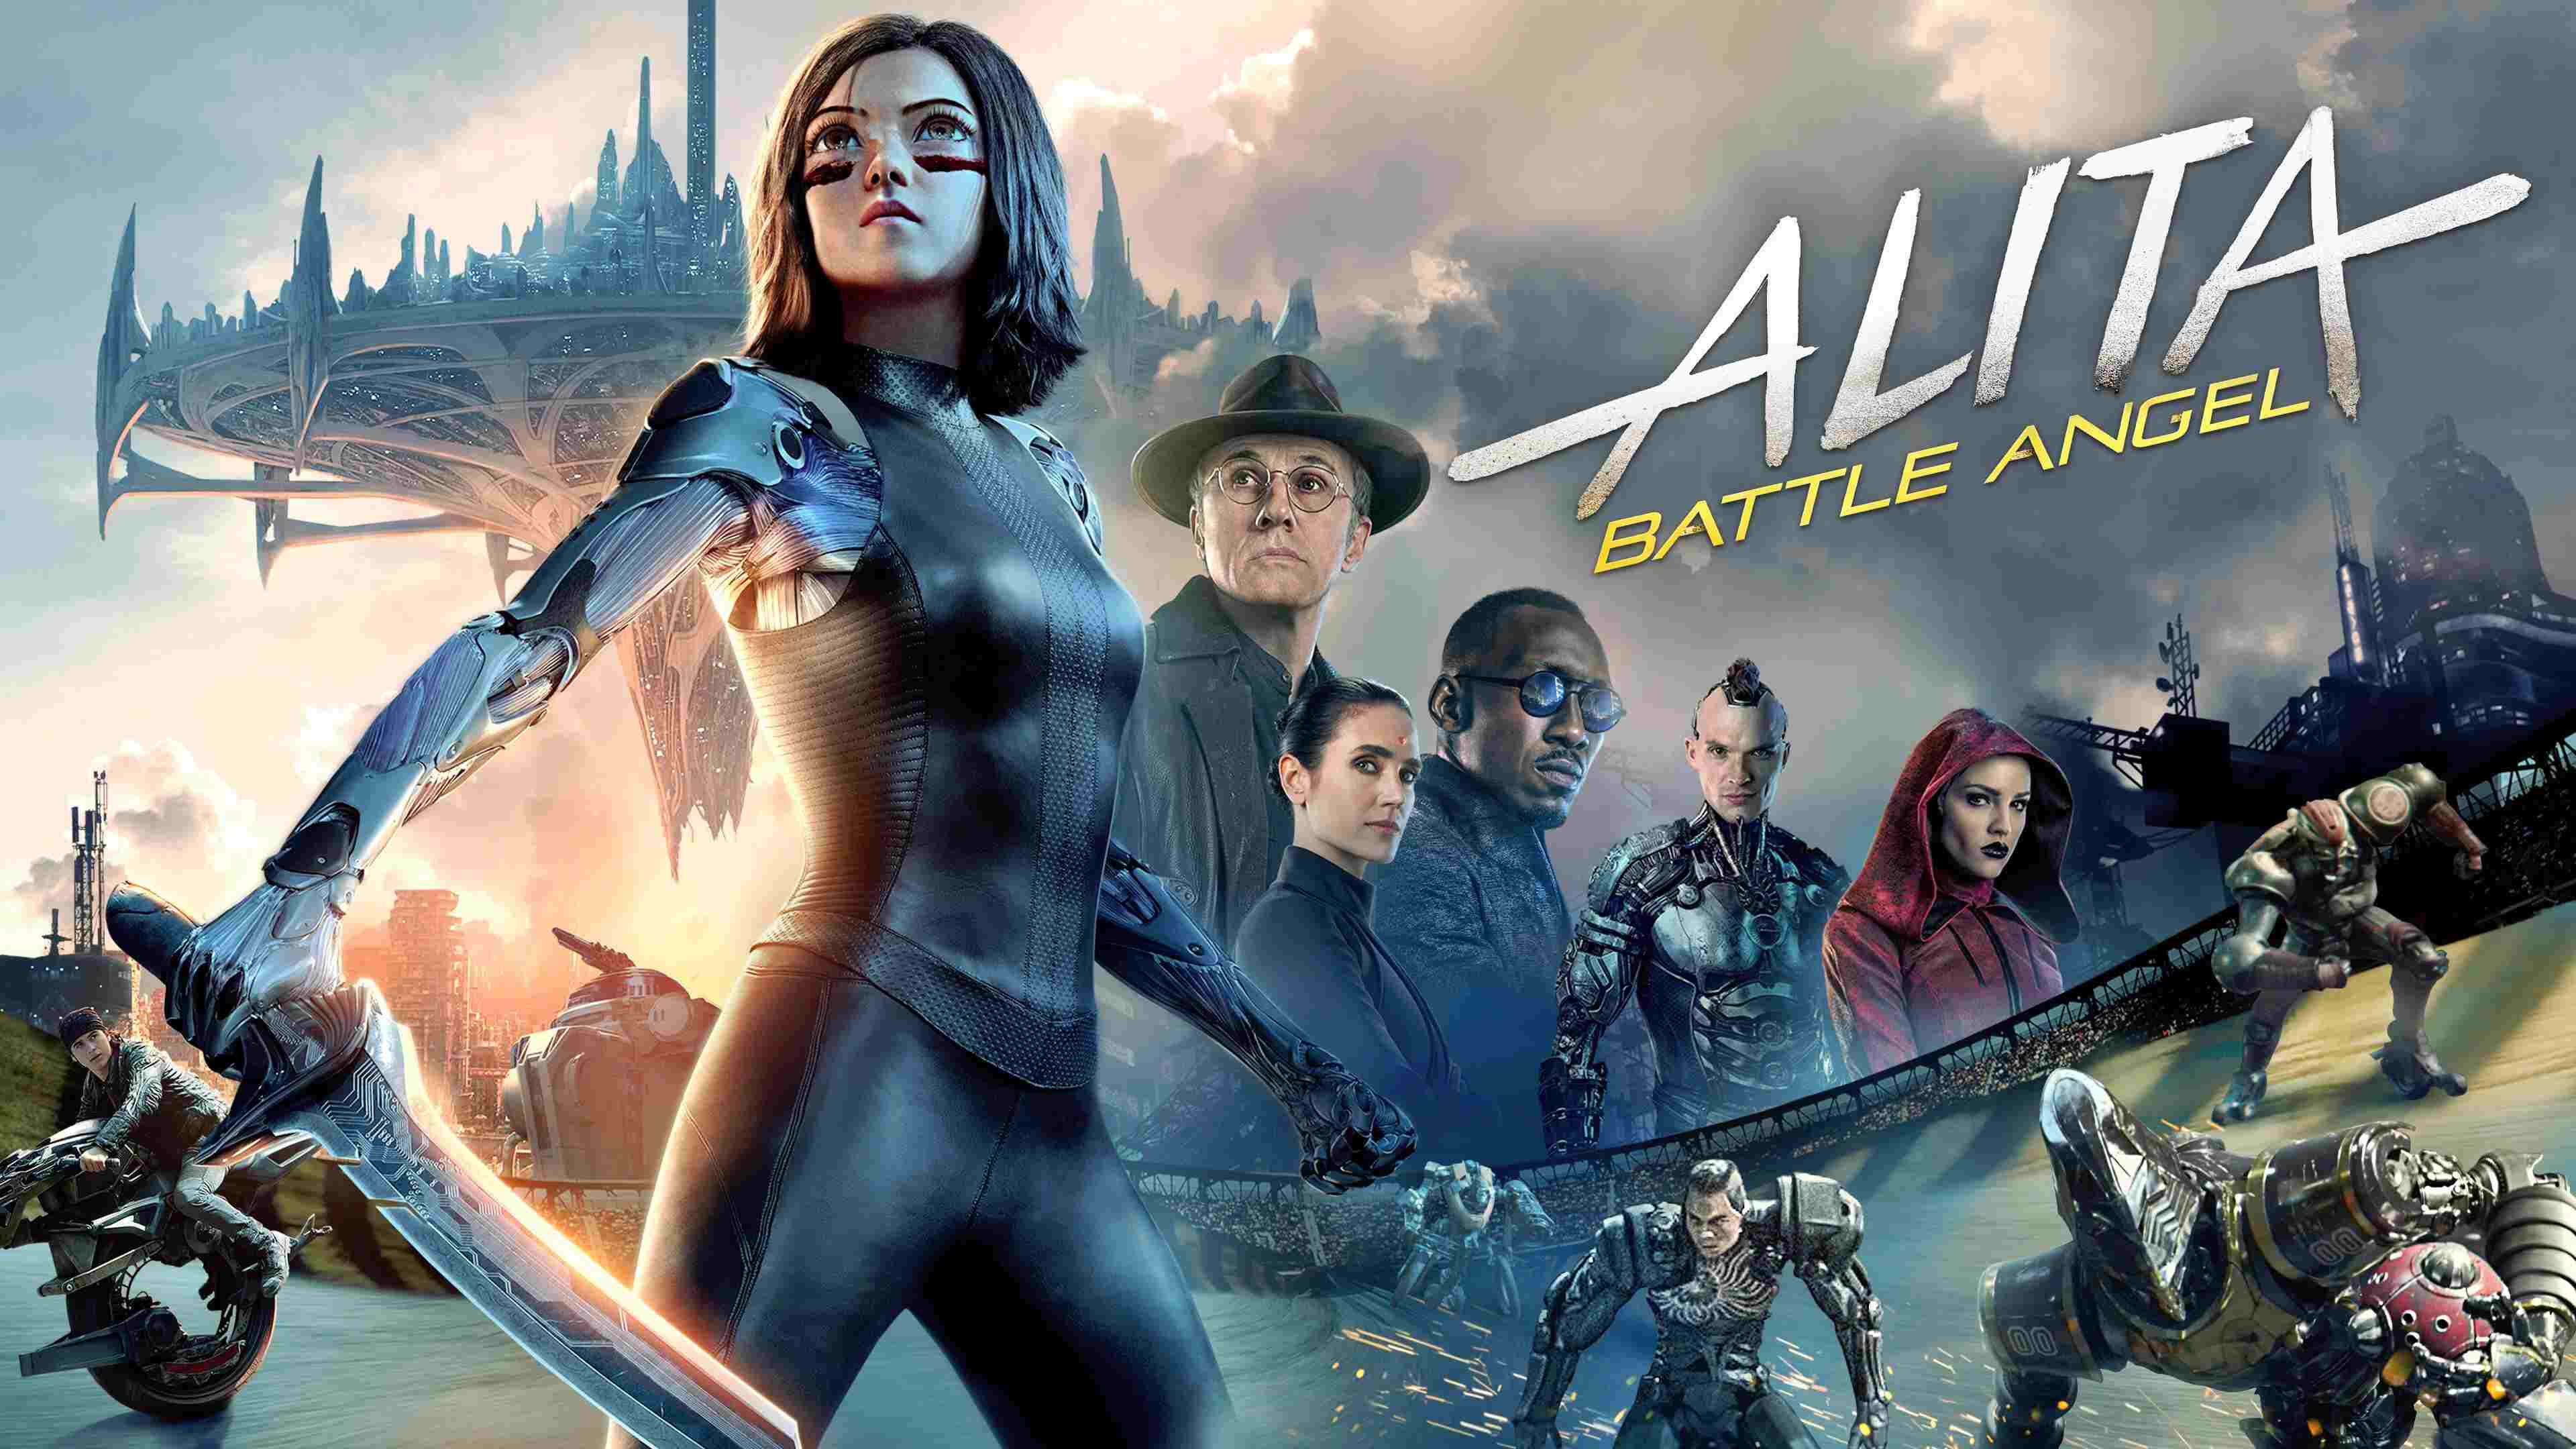 43-facts-about-the-movie-alita-battle-angel